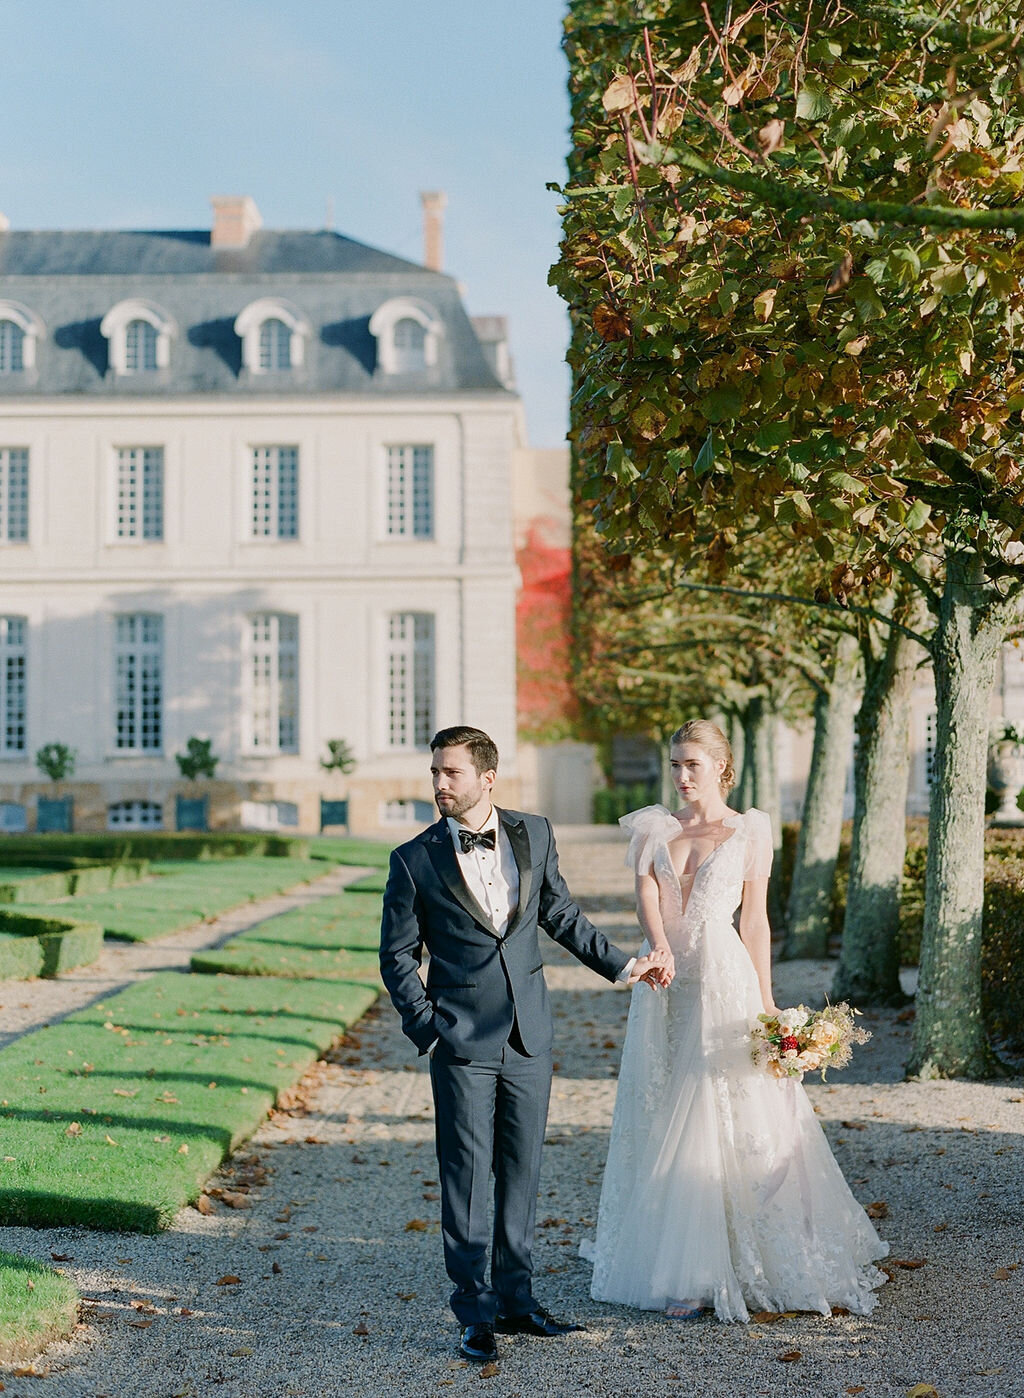 Molly-Carr-Photography-Chateau-Grand-Luce-Wedding-23